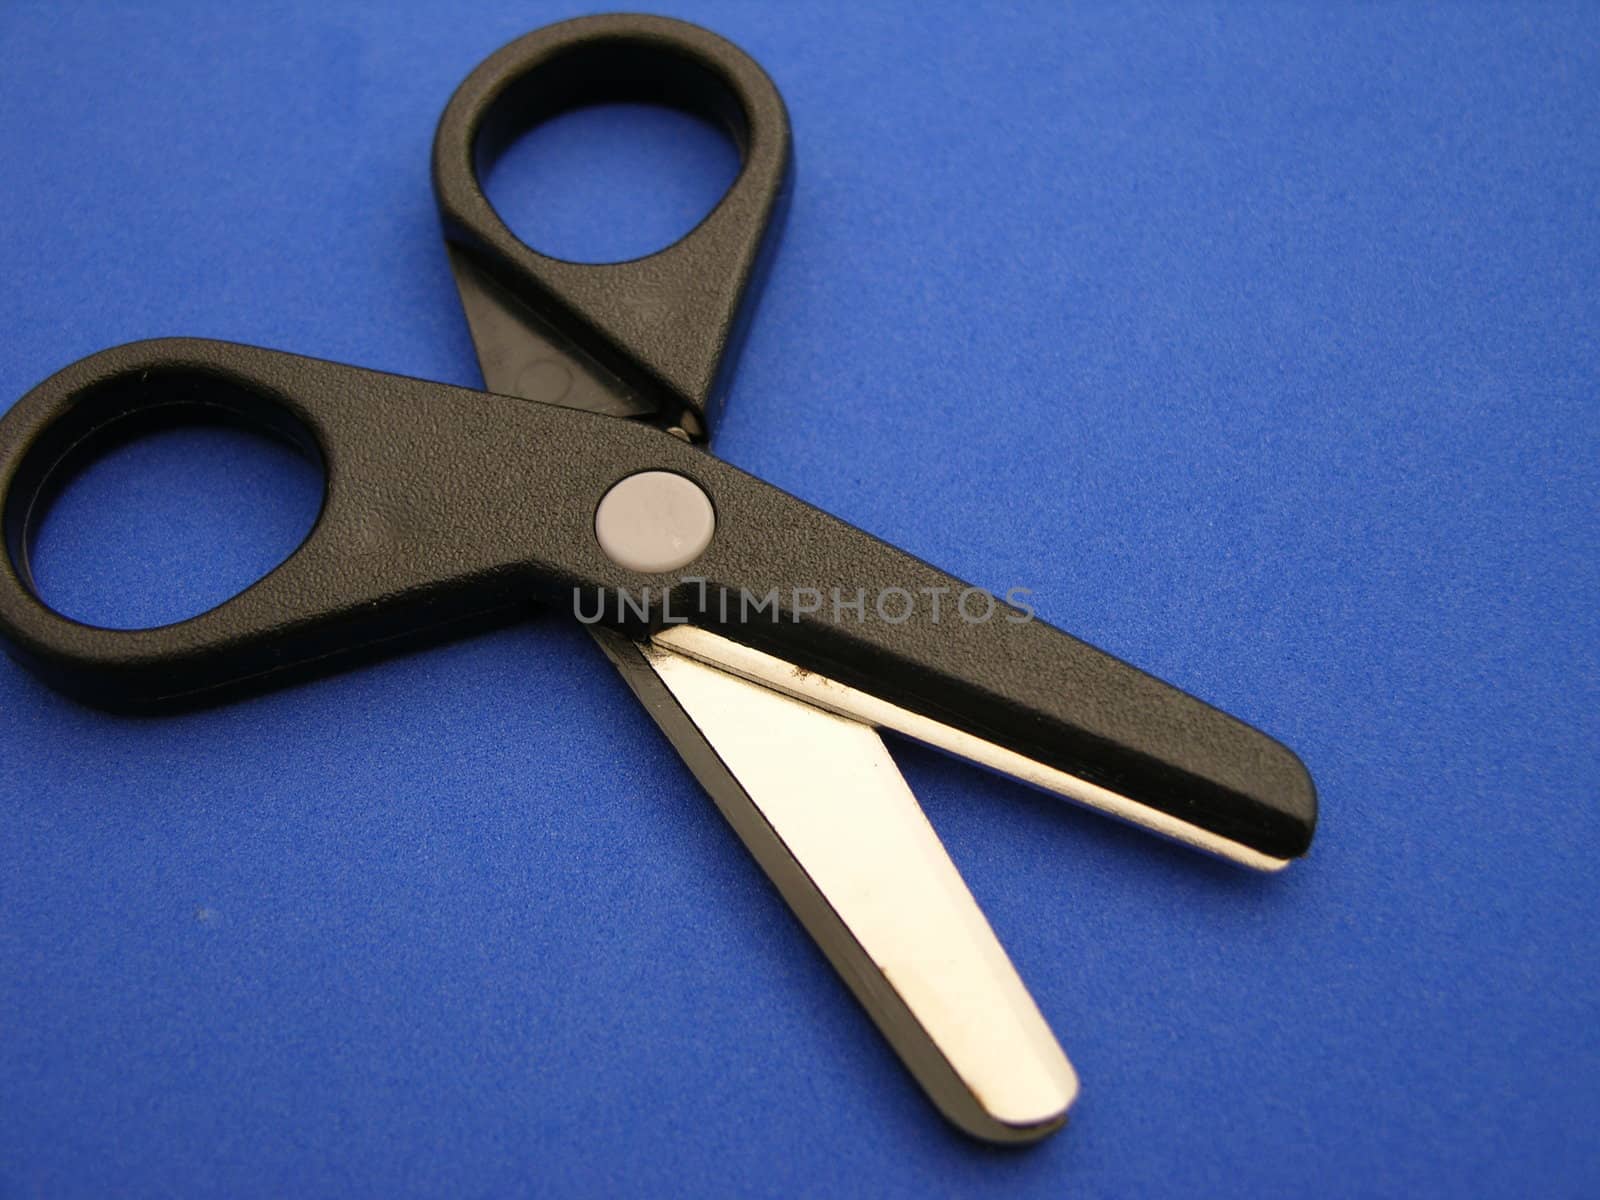 A closeup view of paper scissors on a blue background